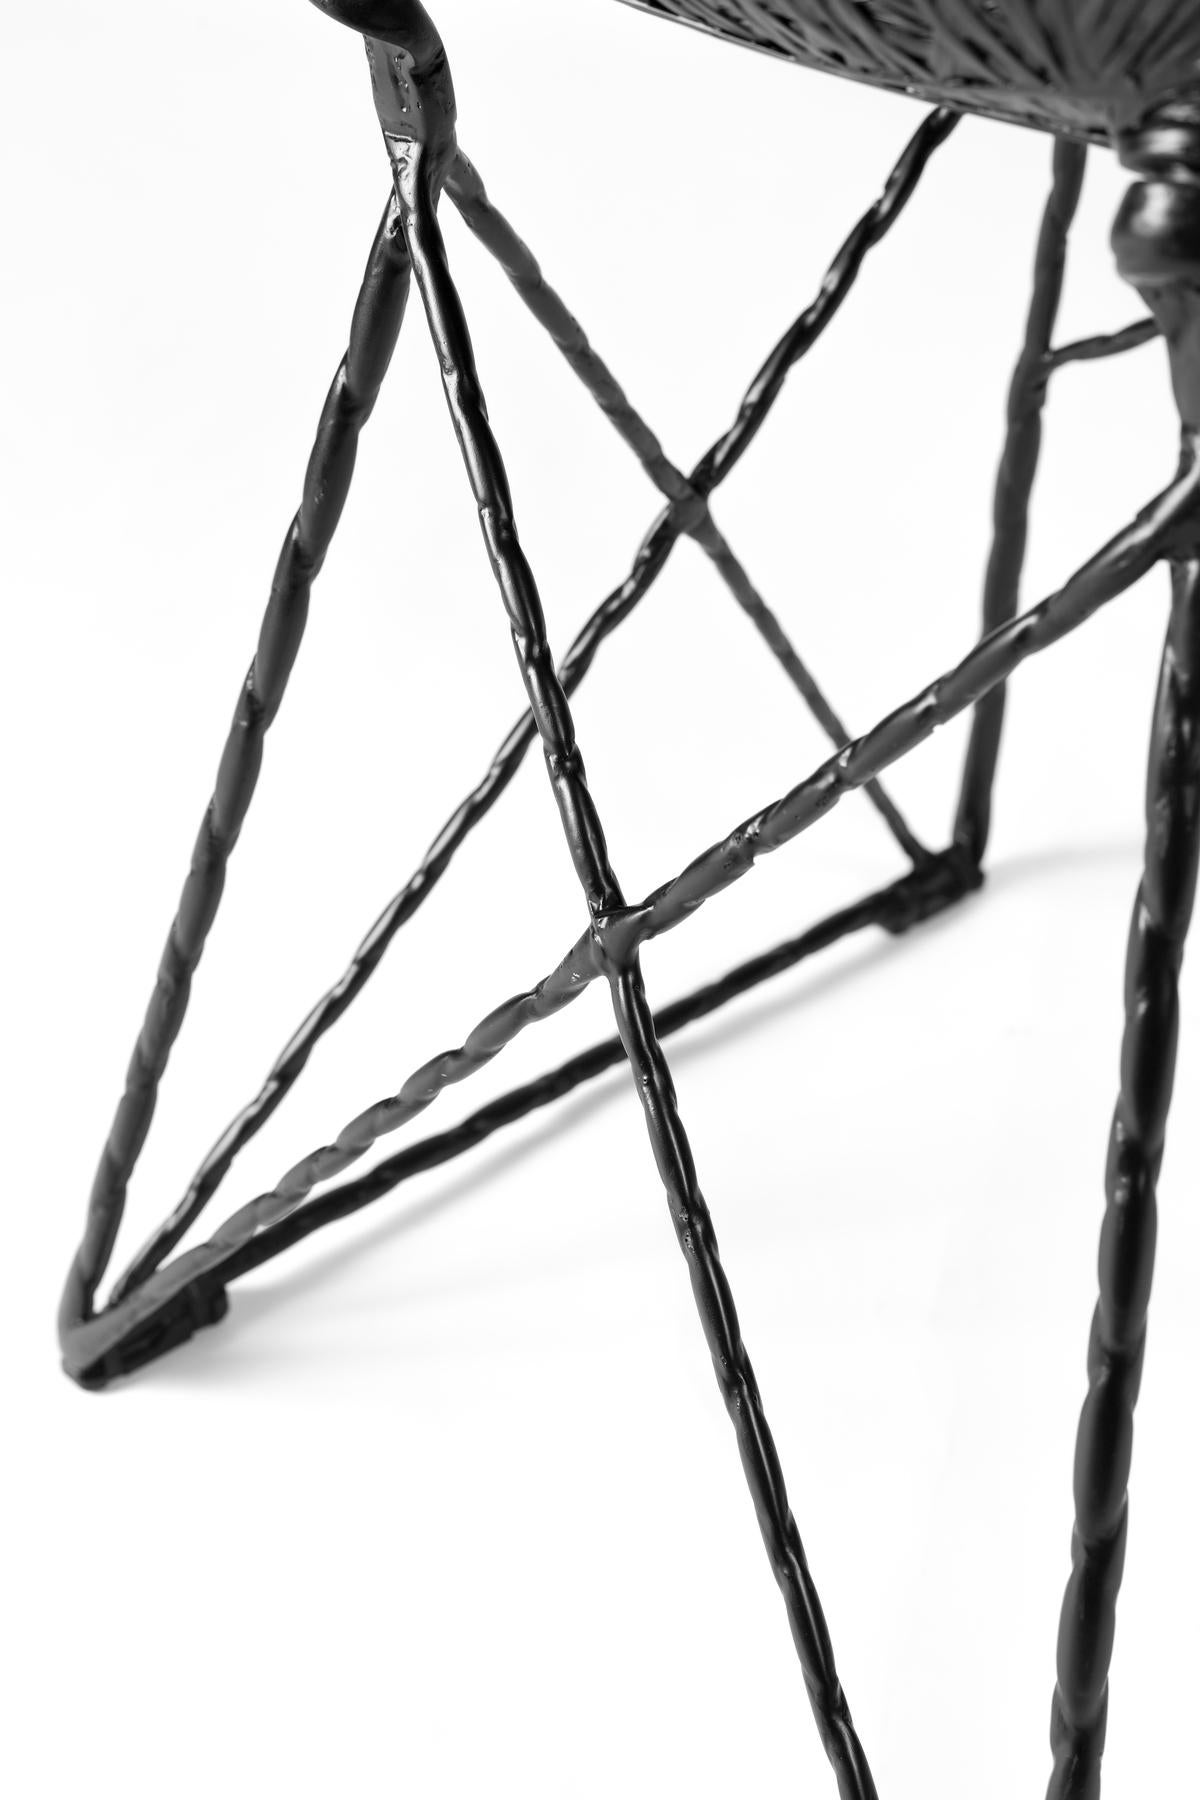 Moooi Carbon Chair in Black Fiber with Epoxy Resin by Bertjan Pot For Sale 6